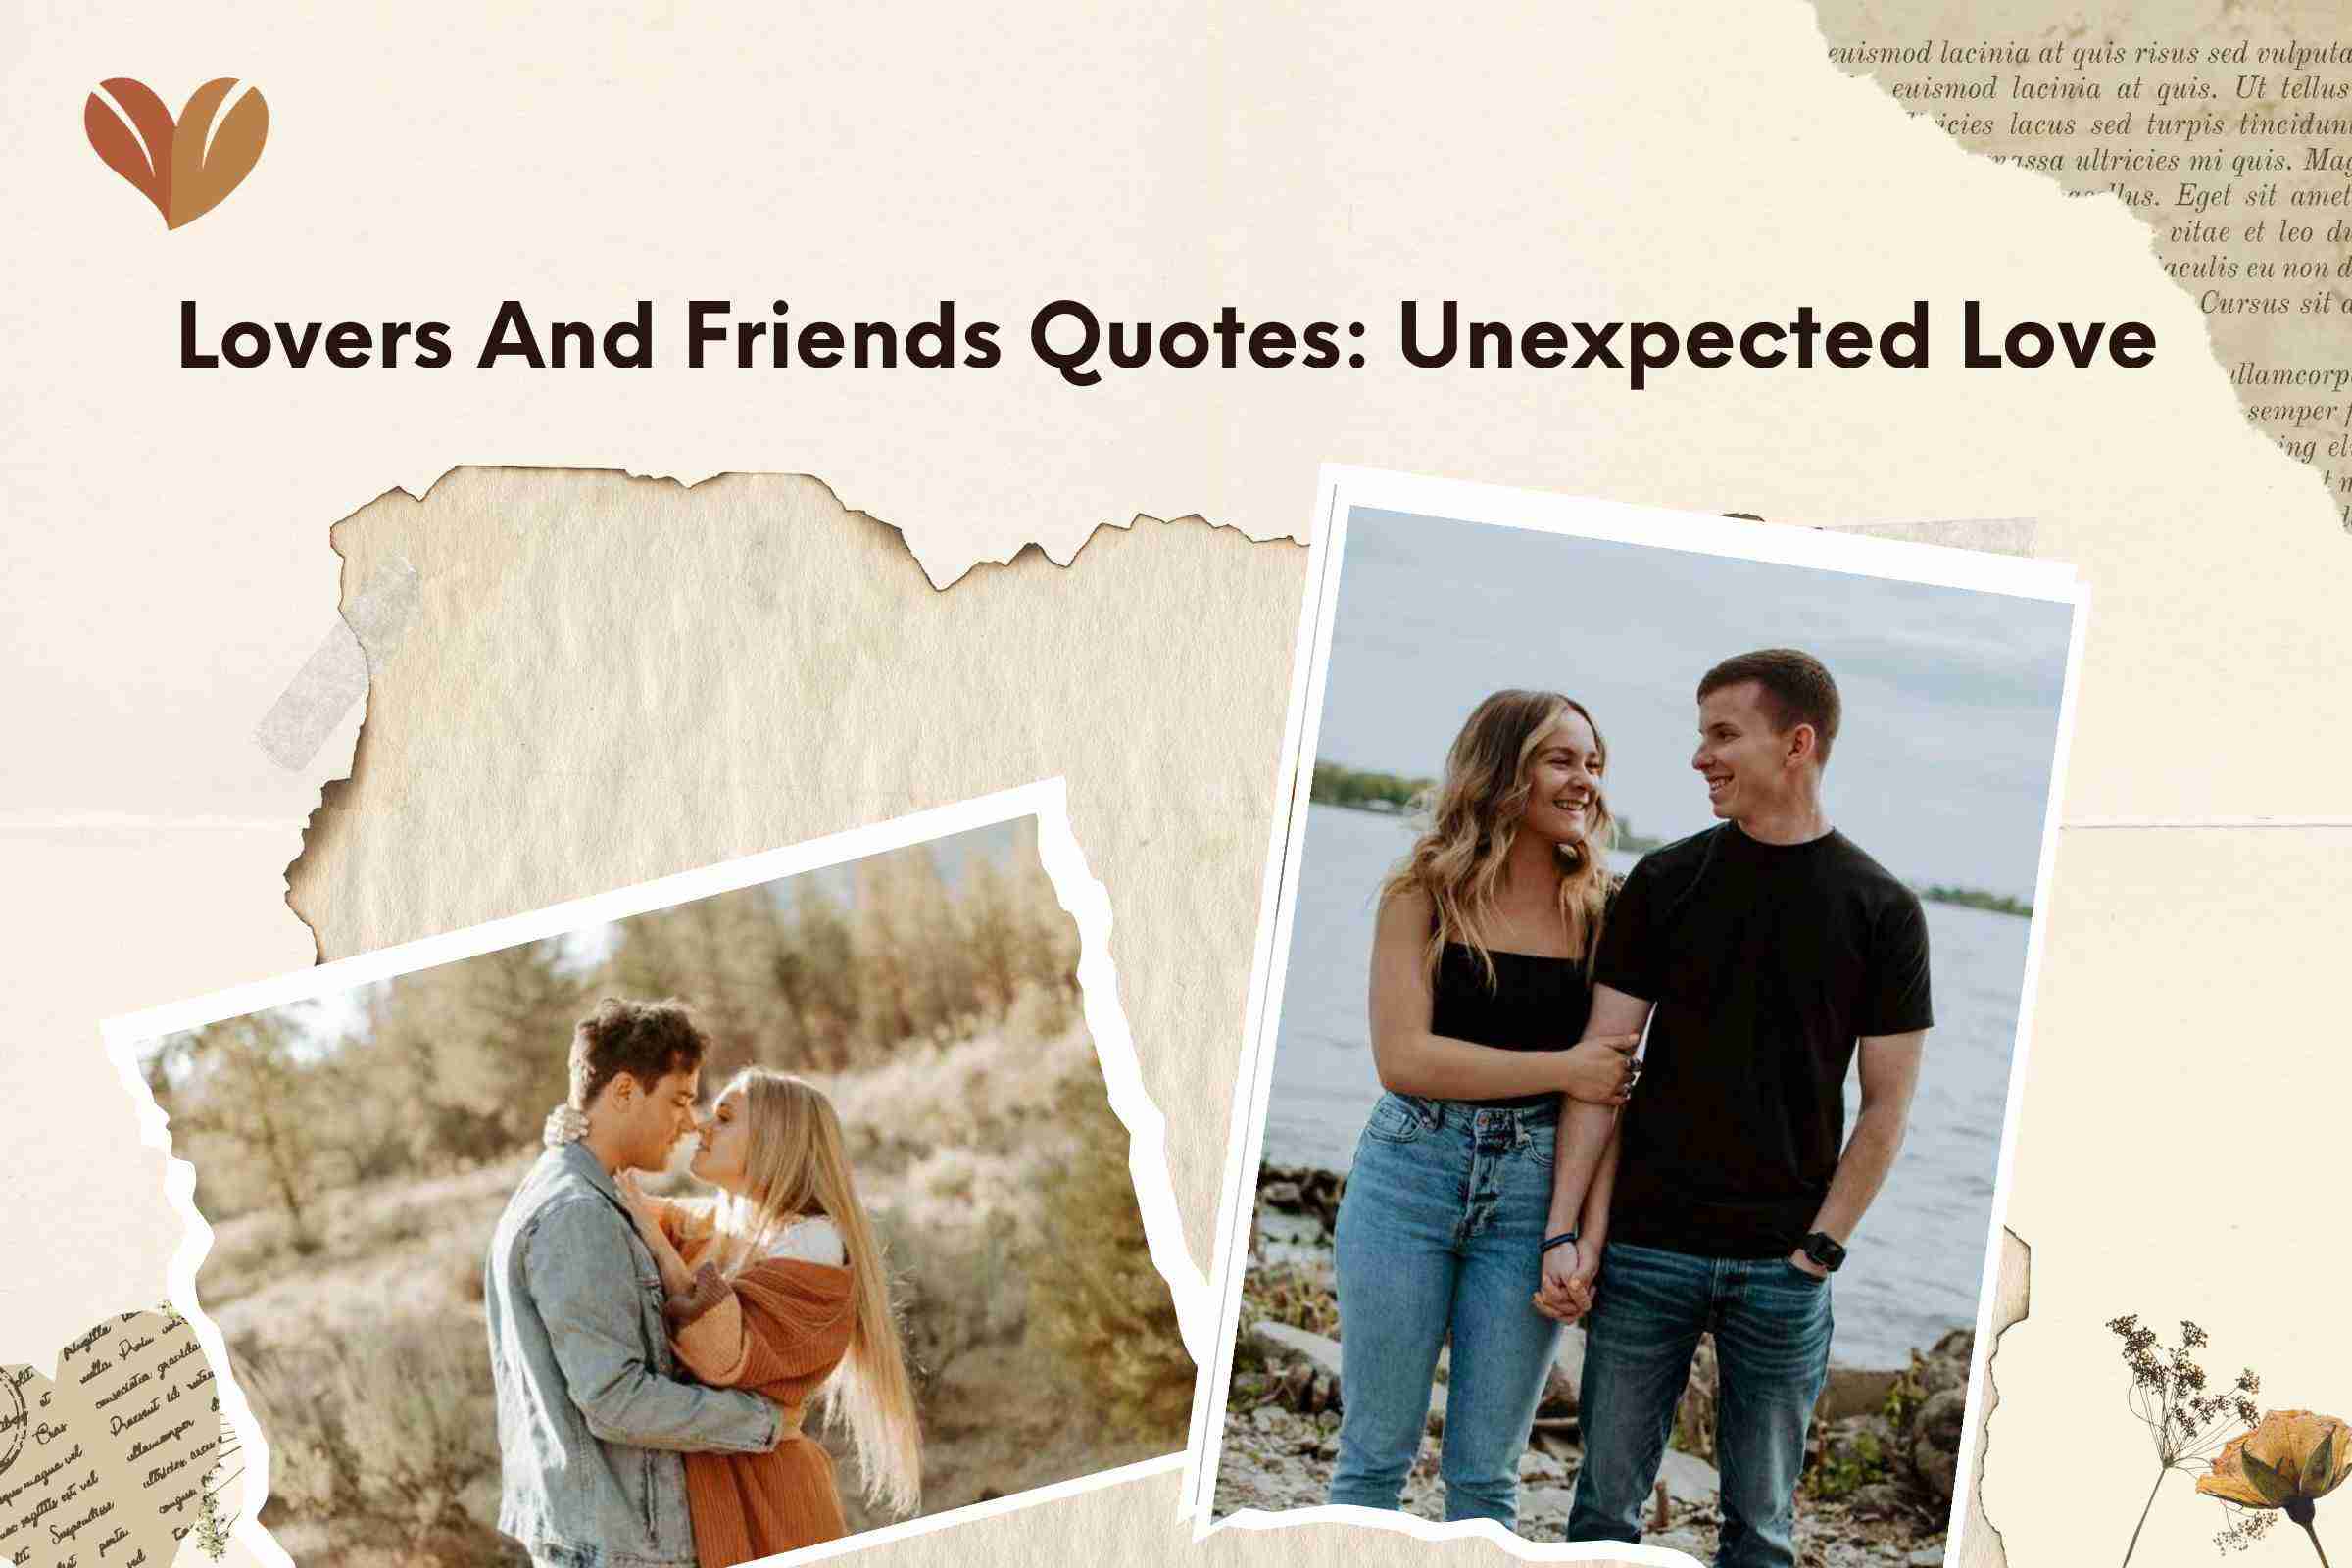 Lovers And Friends Quotes: Unexpected Love